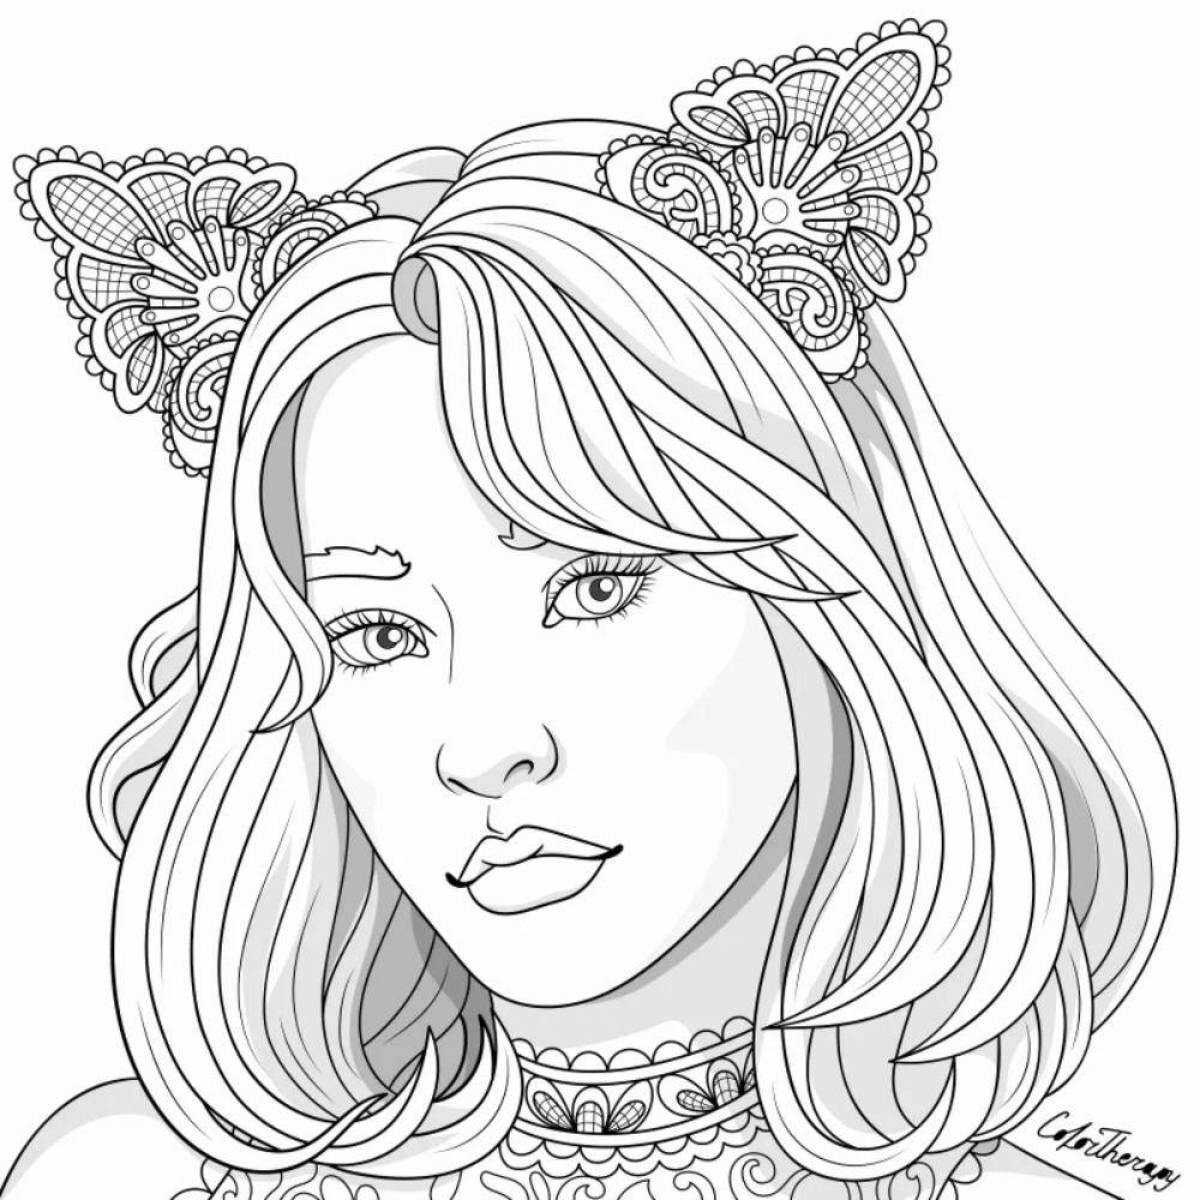 Fun coloring find for girls